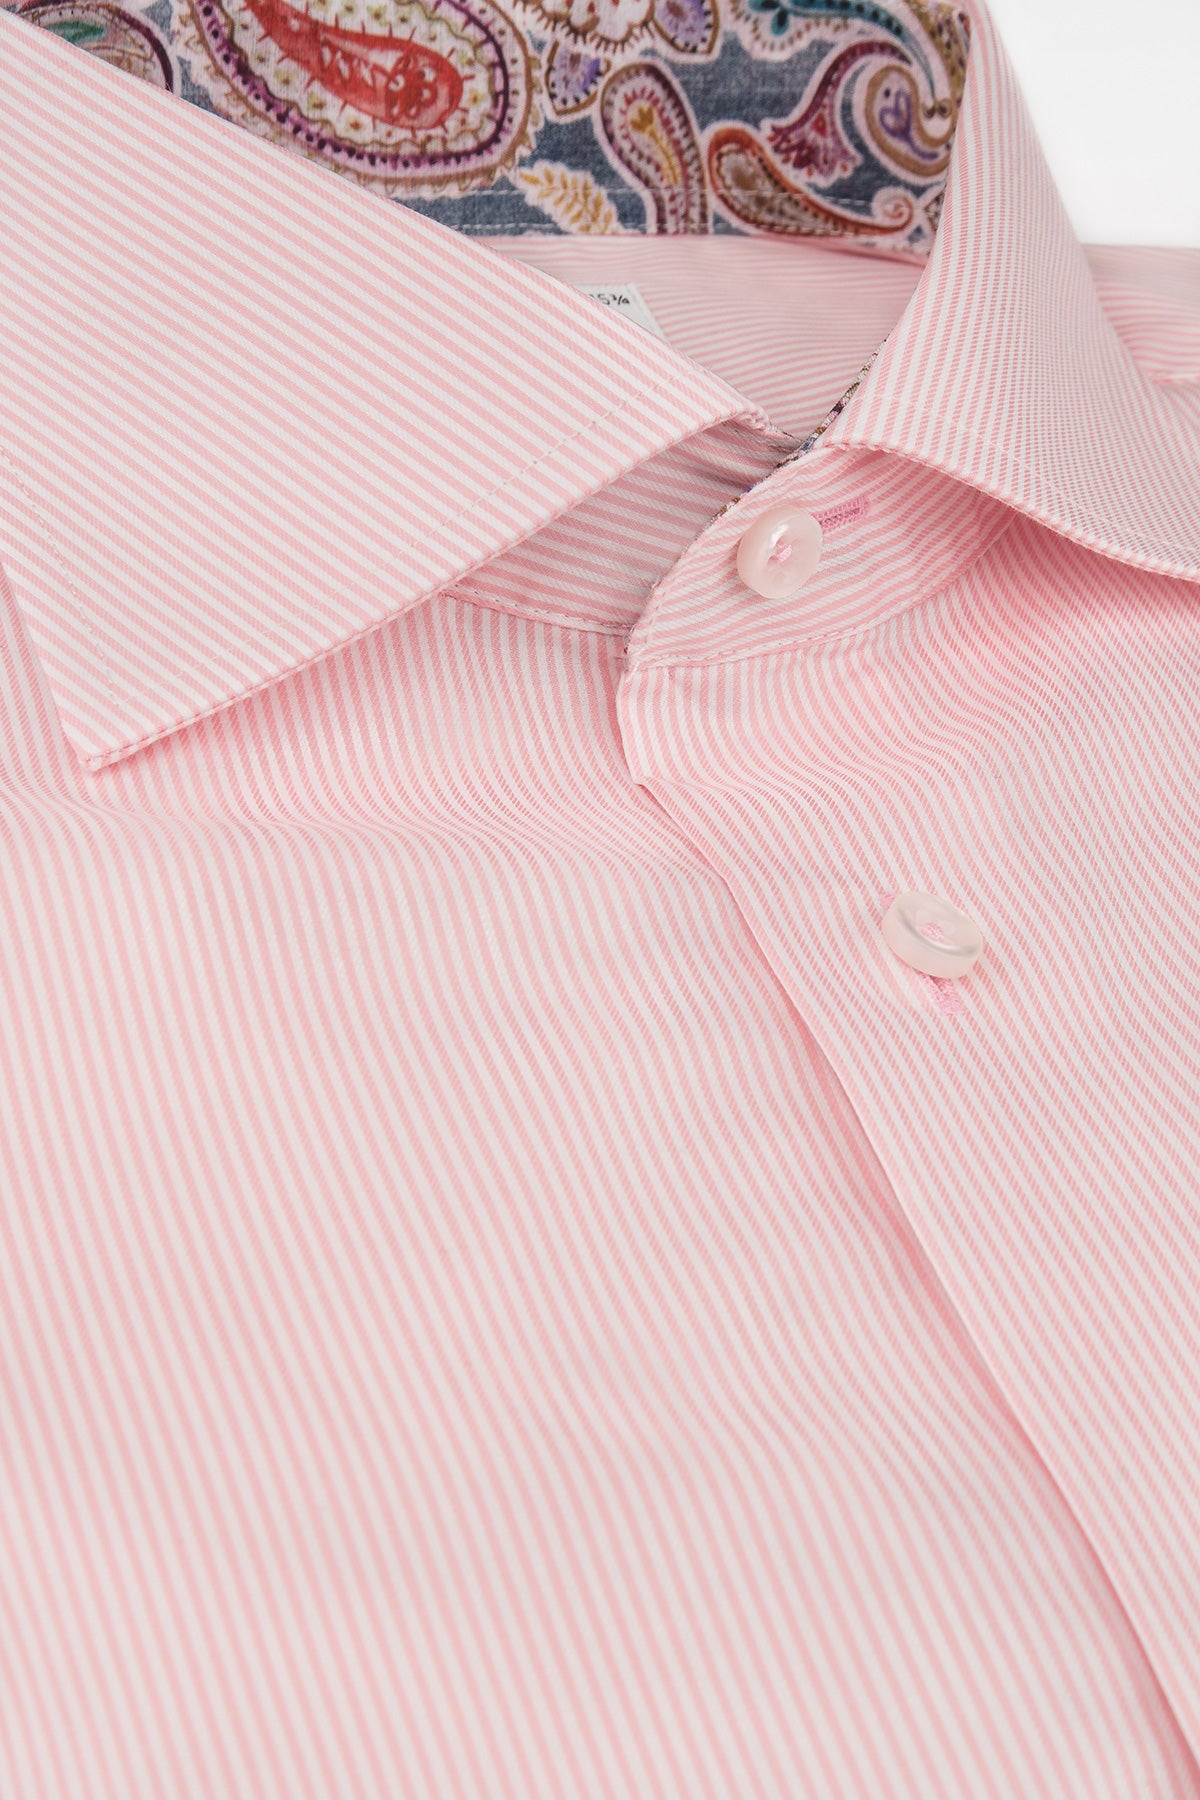 Pink striped regular fit shirt with contrast details